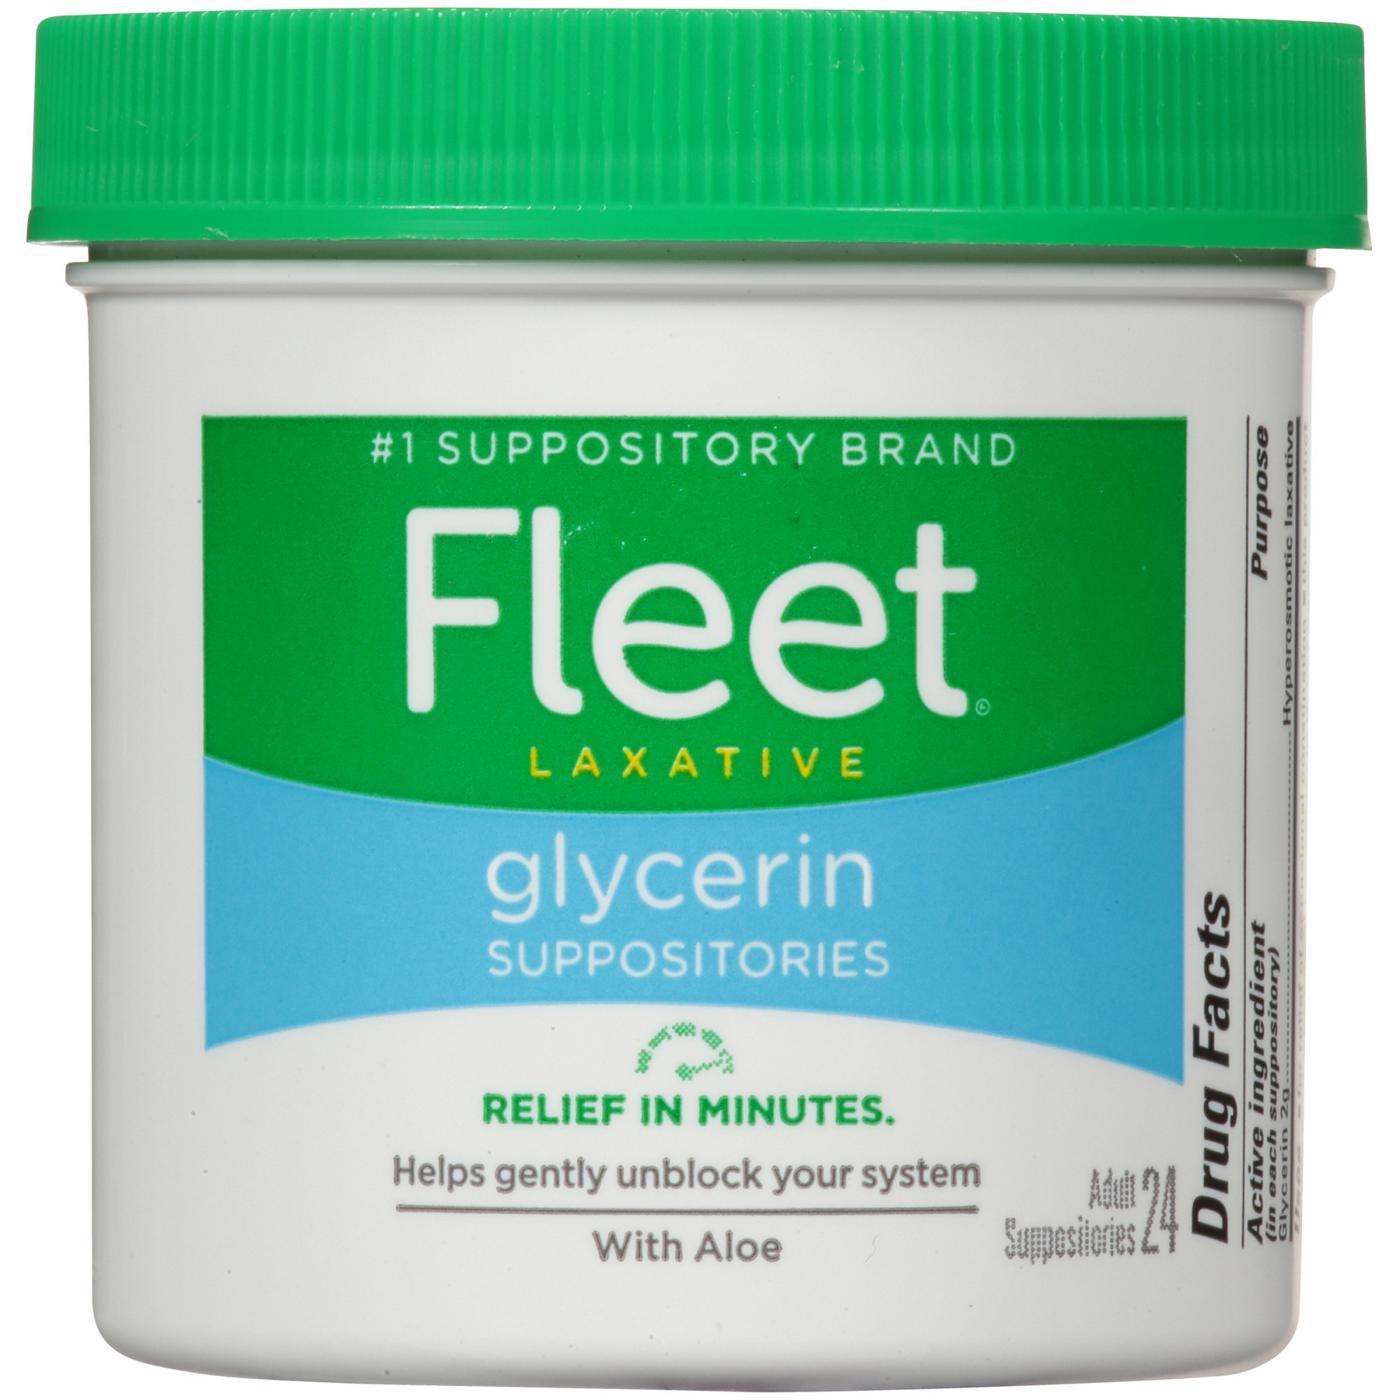 Fleet Laxative Glycerin Suppositories; image 1 of 3